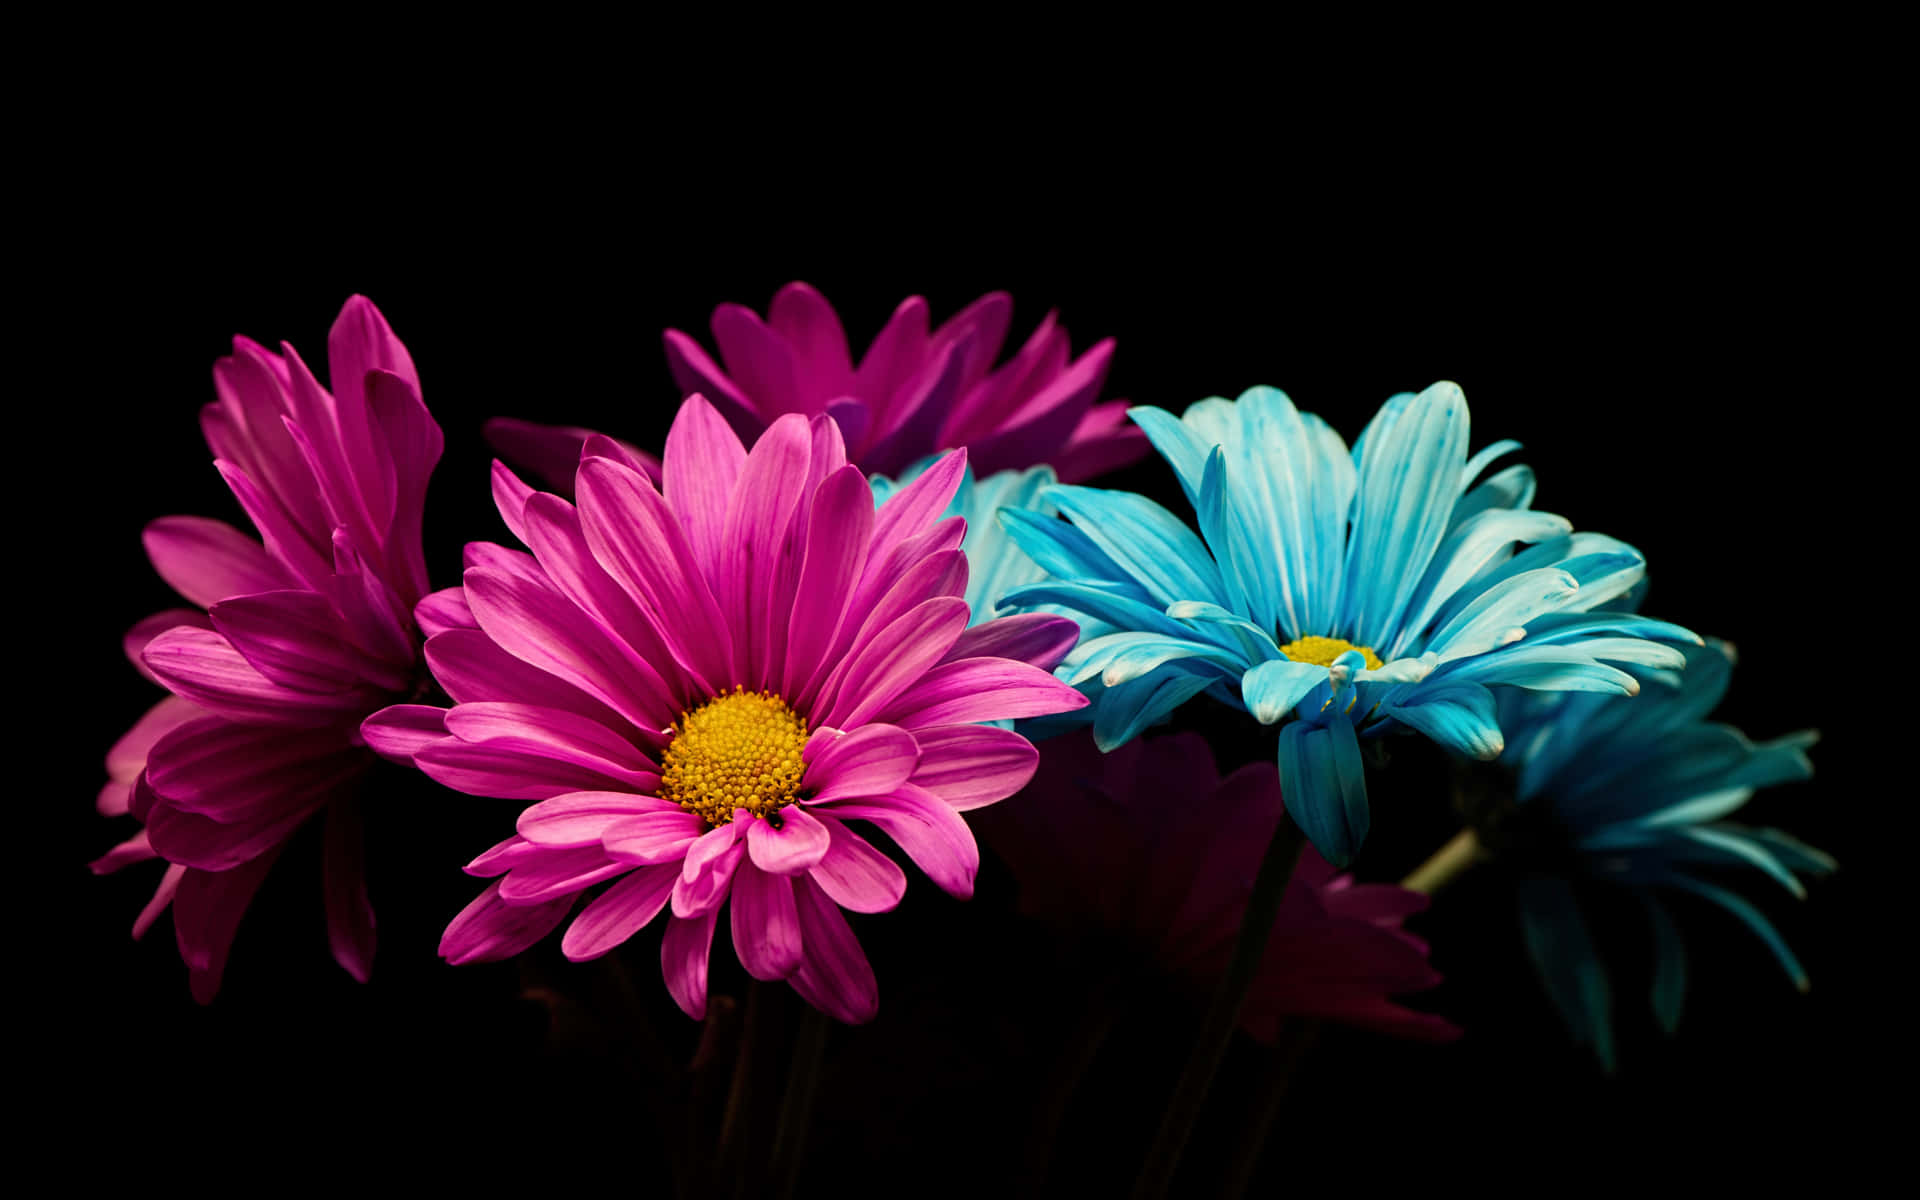 "A Burst of Color - Colorful Daisies" Wallpaper